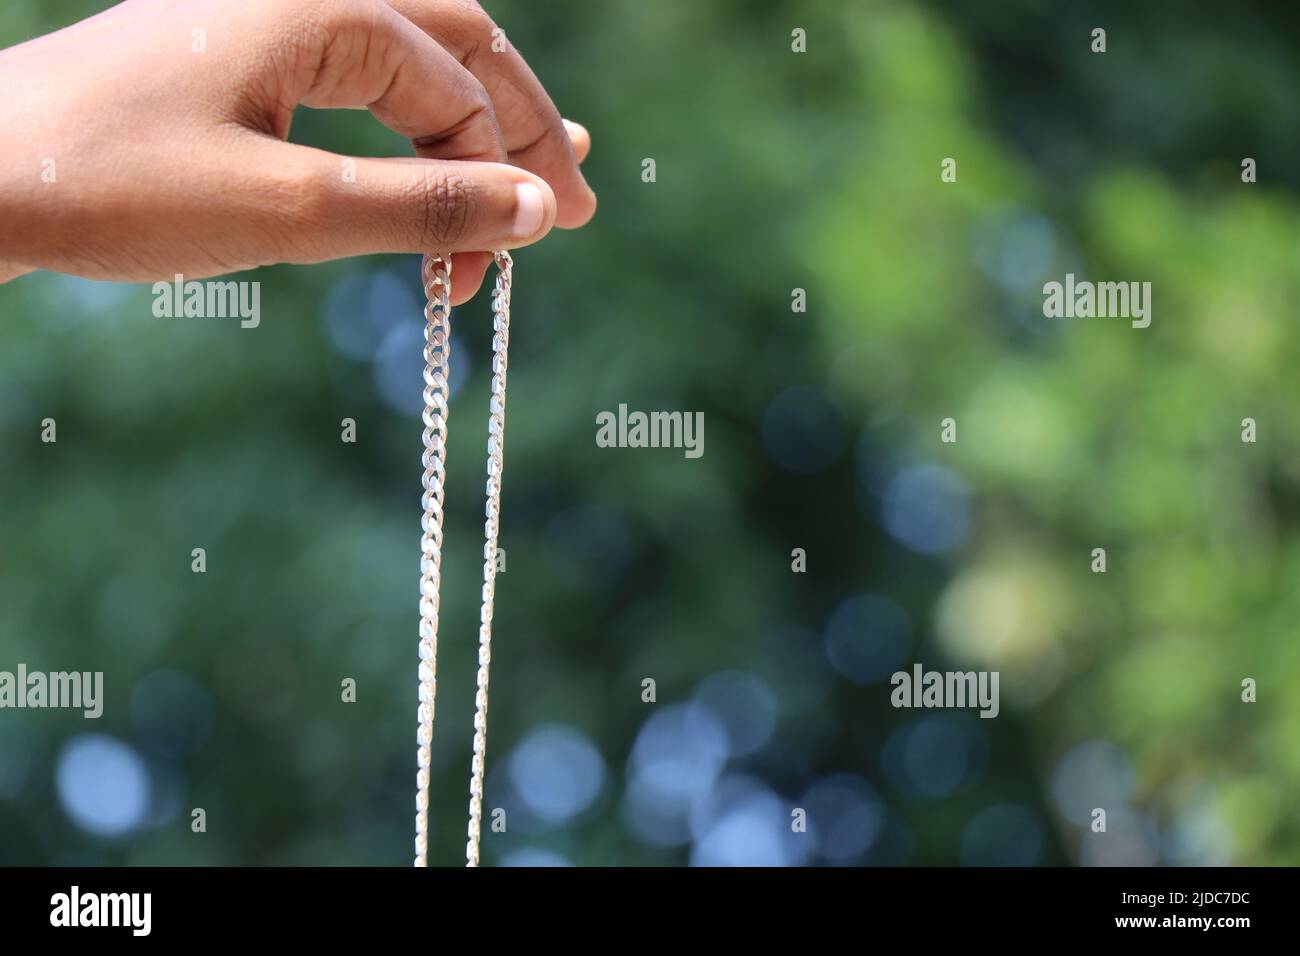 Holding a new silver chain in hand on green nature background Stock Photo